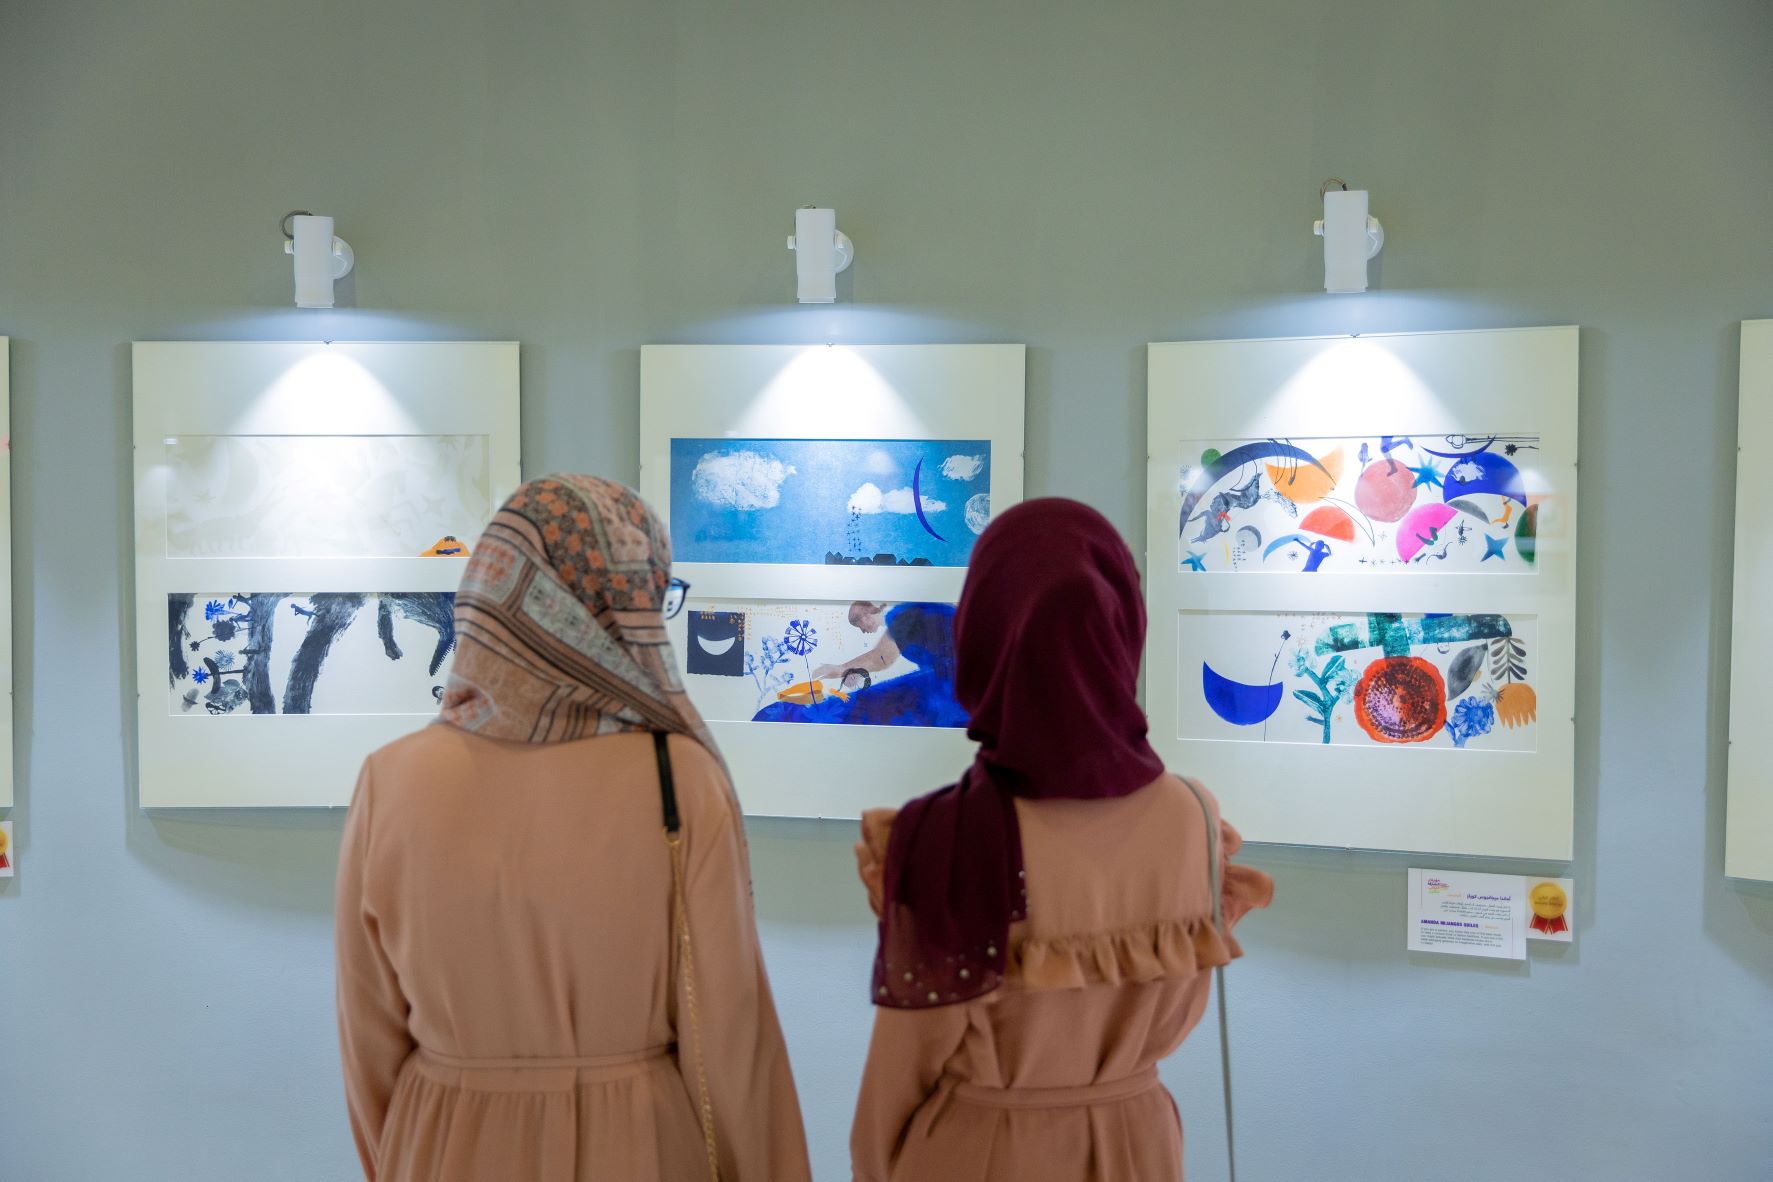 sharjah children’s book illustration award introduces new category for young artists